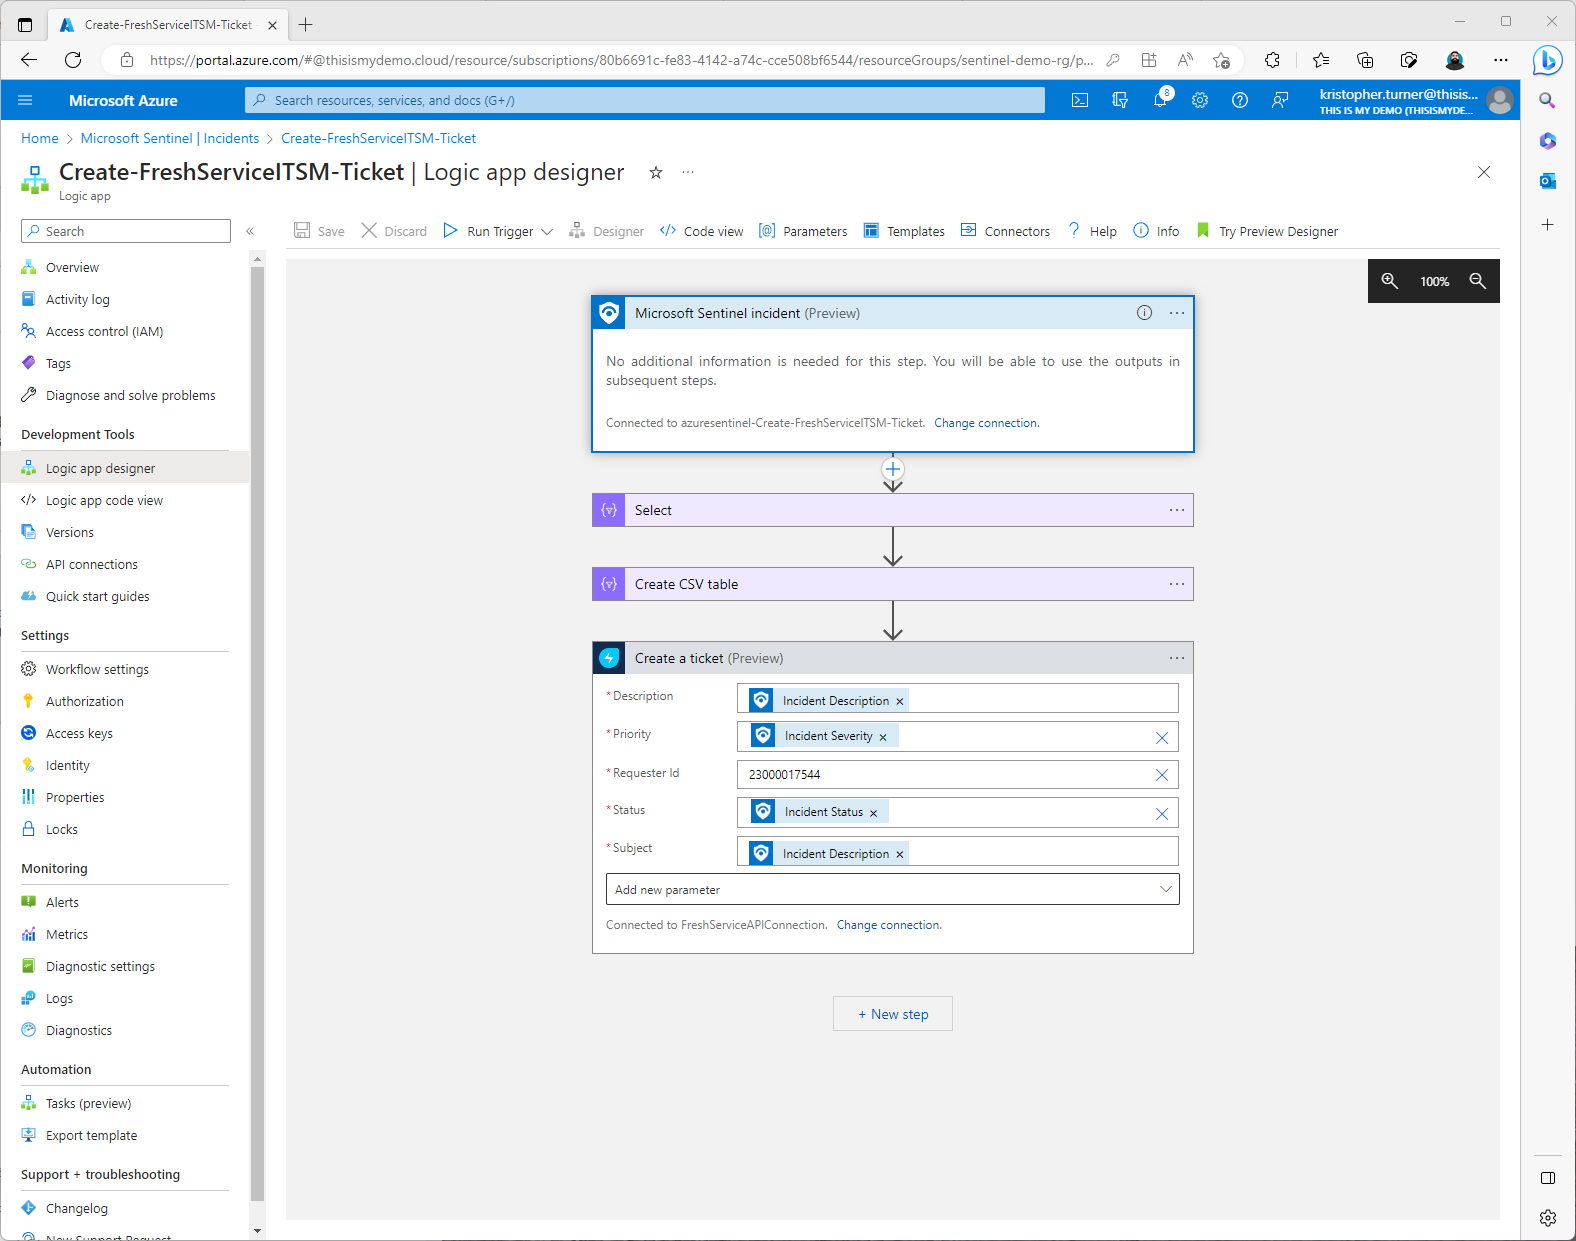 How to Integrate Microsoft Sentinel and Freshservice